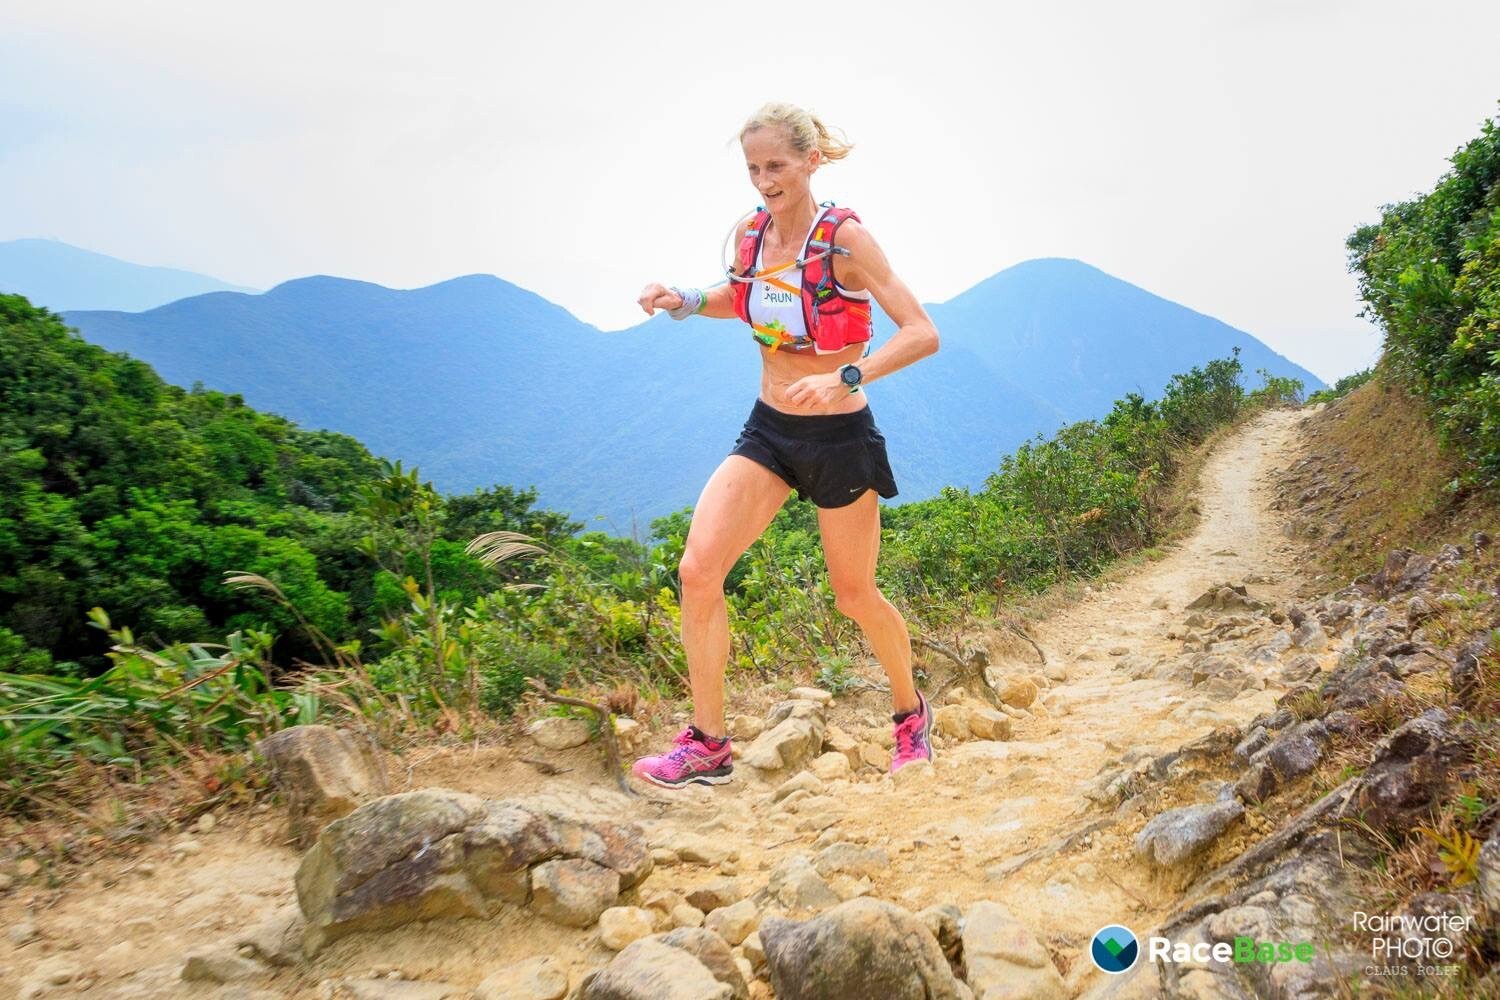 Hong Kong-based runner Charlotte Cutler, who has won a number of races over her 35 years of racing. New research shows that female runners of all ages are better at pacing during endurance events than men. Photo: Charlotte Cutler